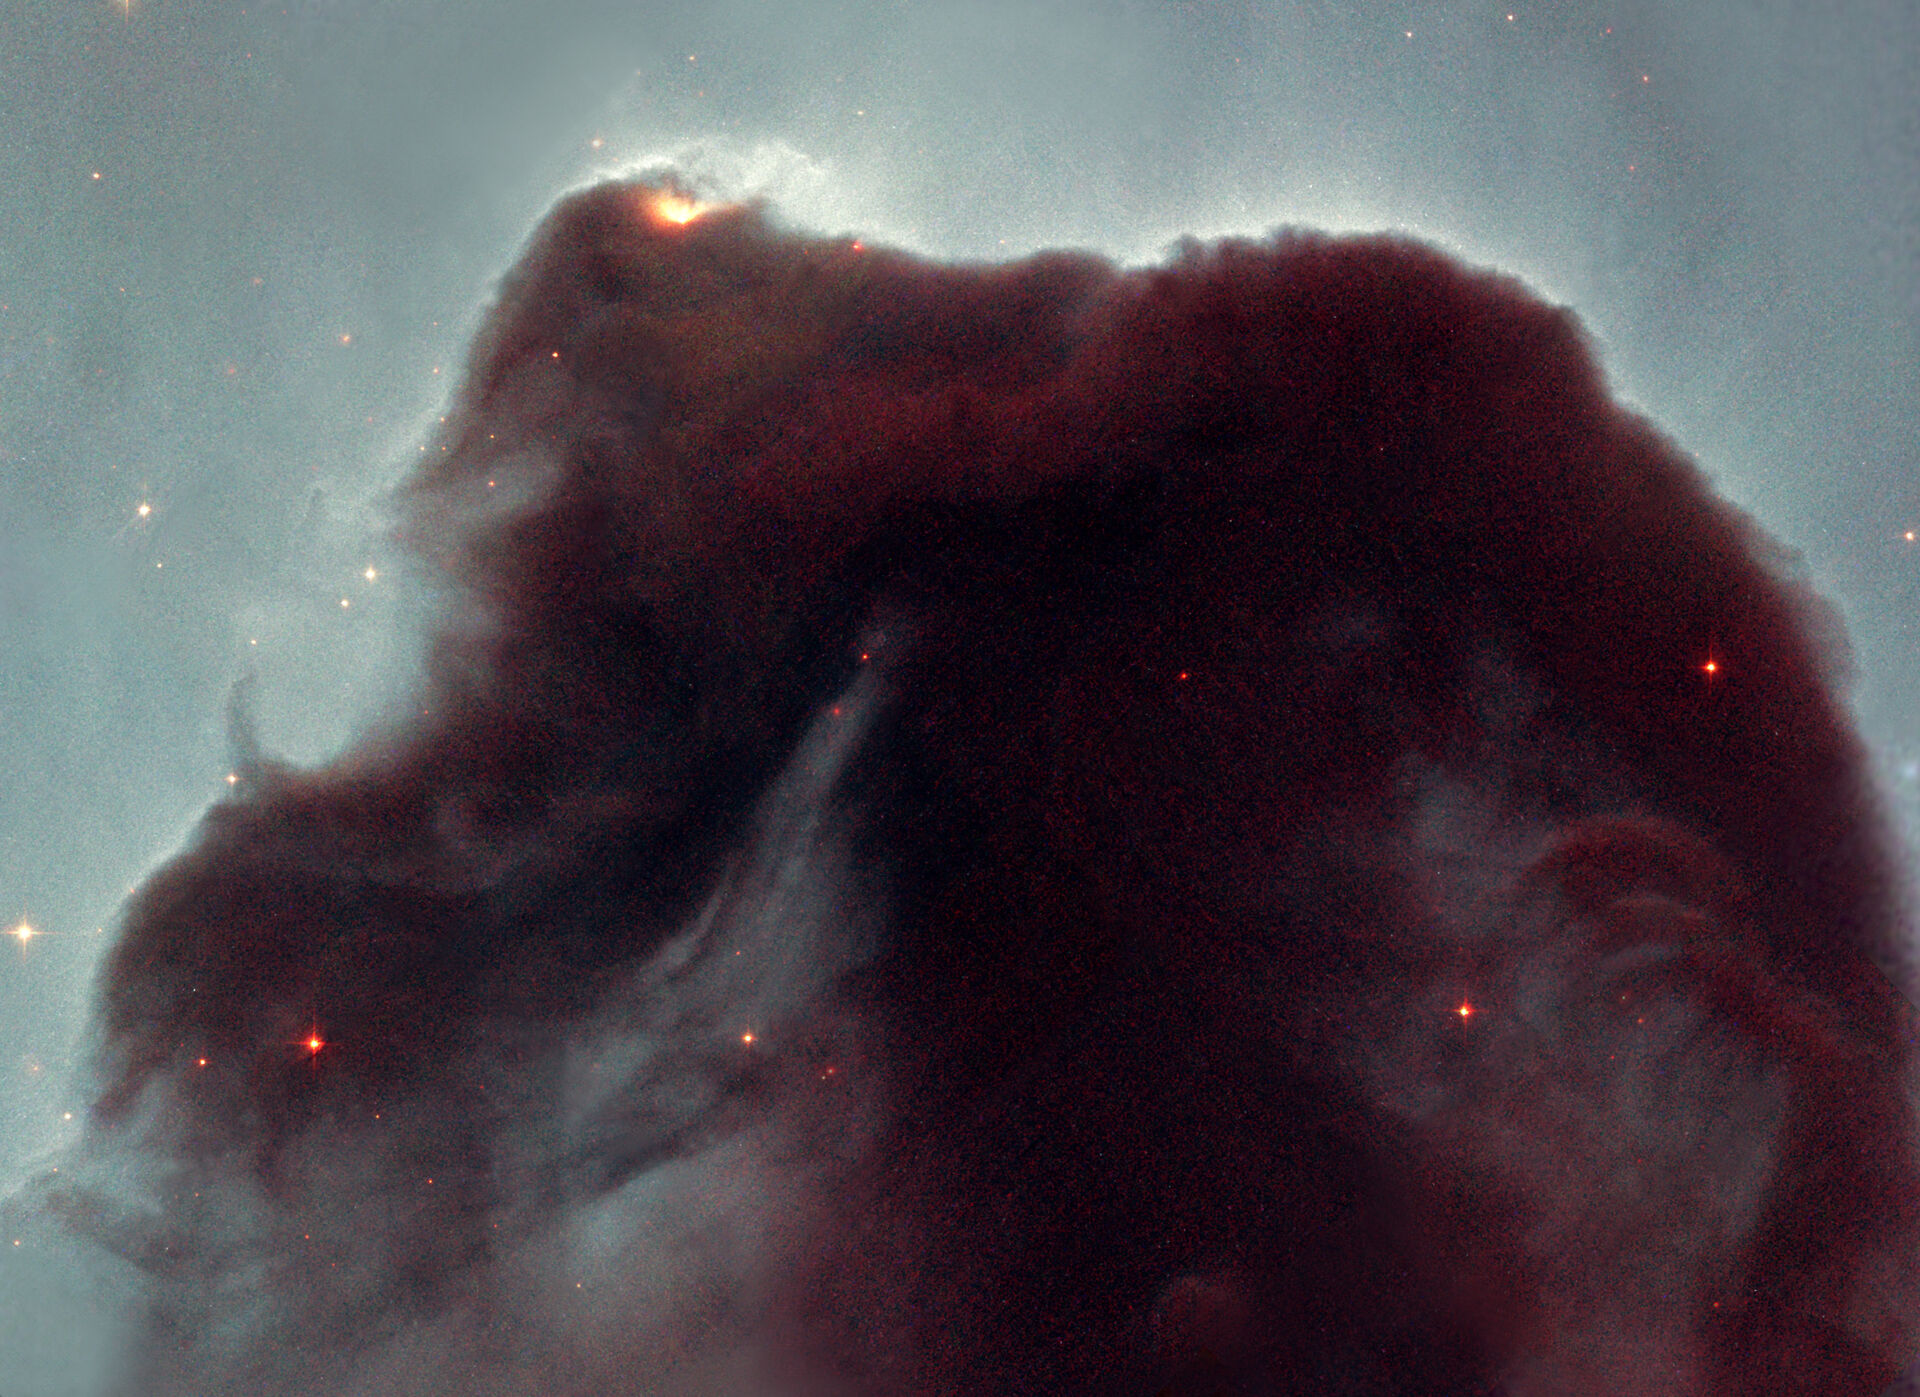 Image of the Horsehead Nebula located in the constellation of Orion. The nebula is a cold, dark cloud of gas and dust silhouetted against the bright nebula, IC 434.